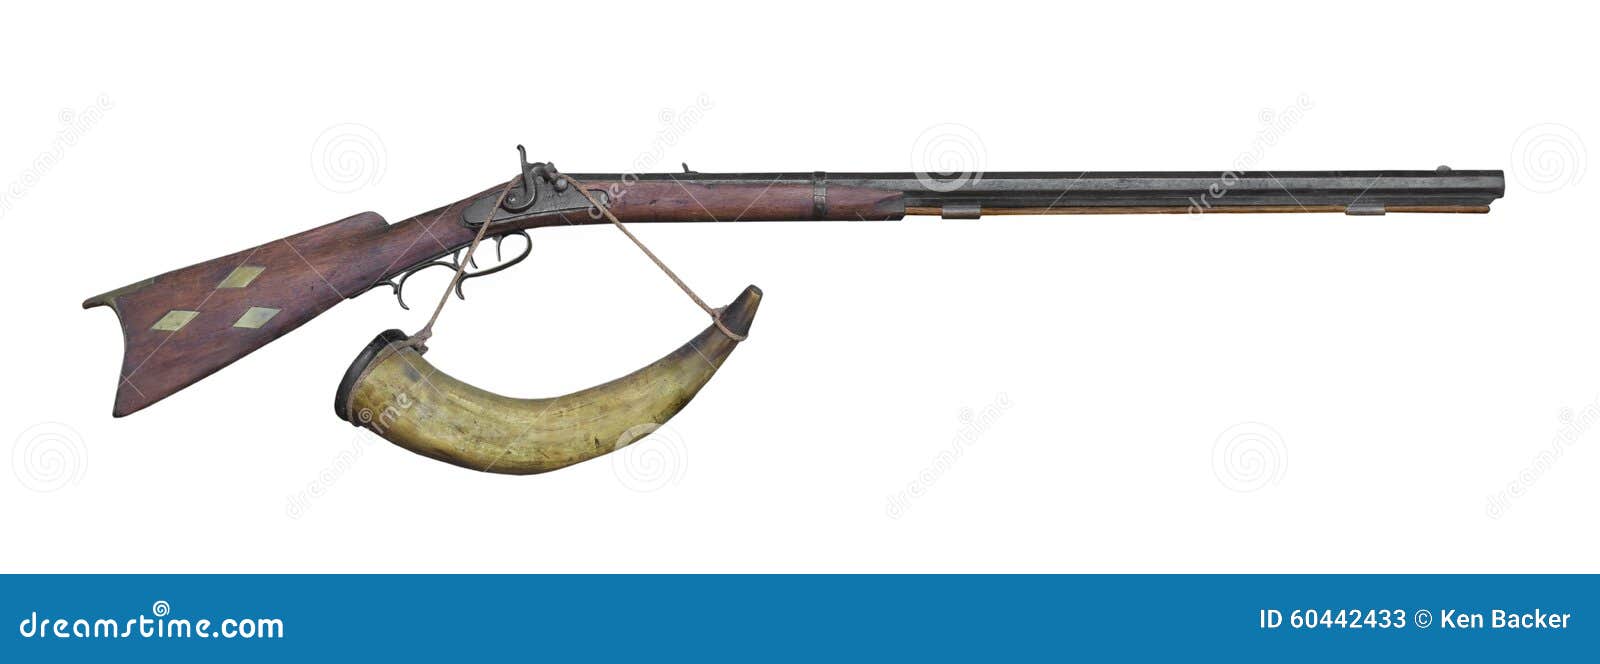 muzzle loading rifle and powder horn .